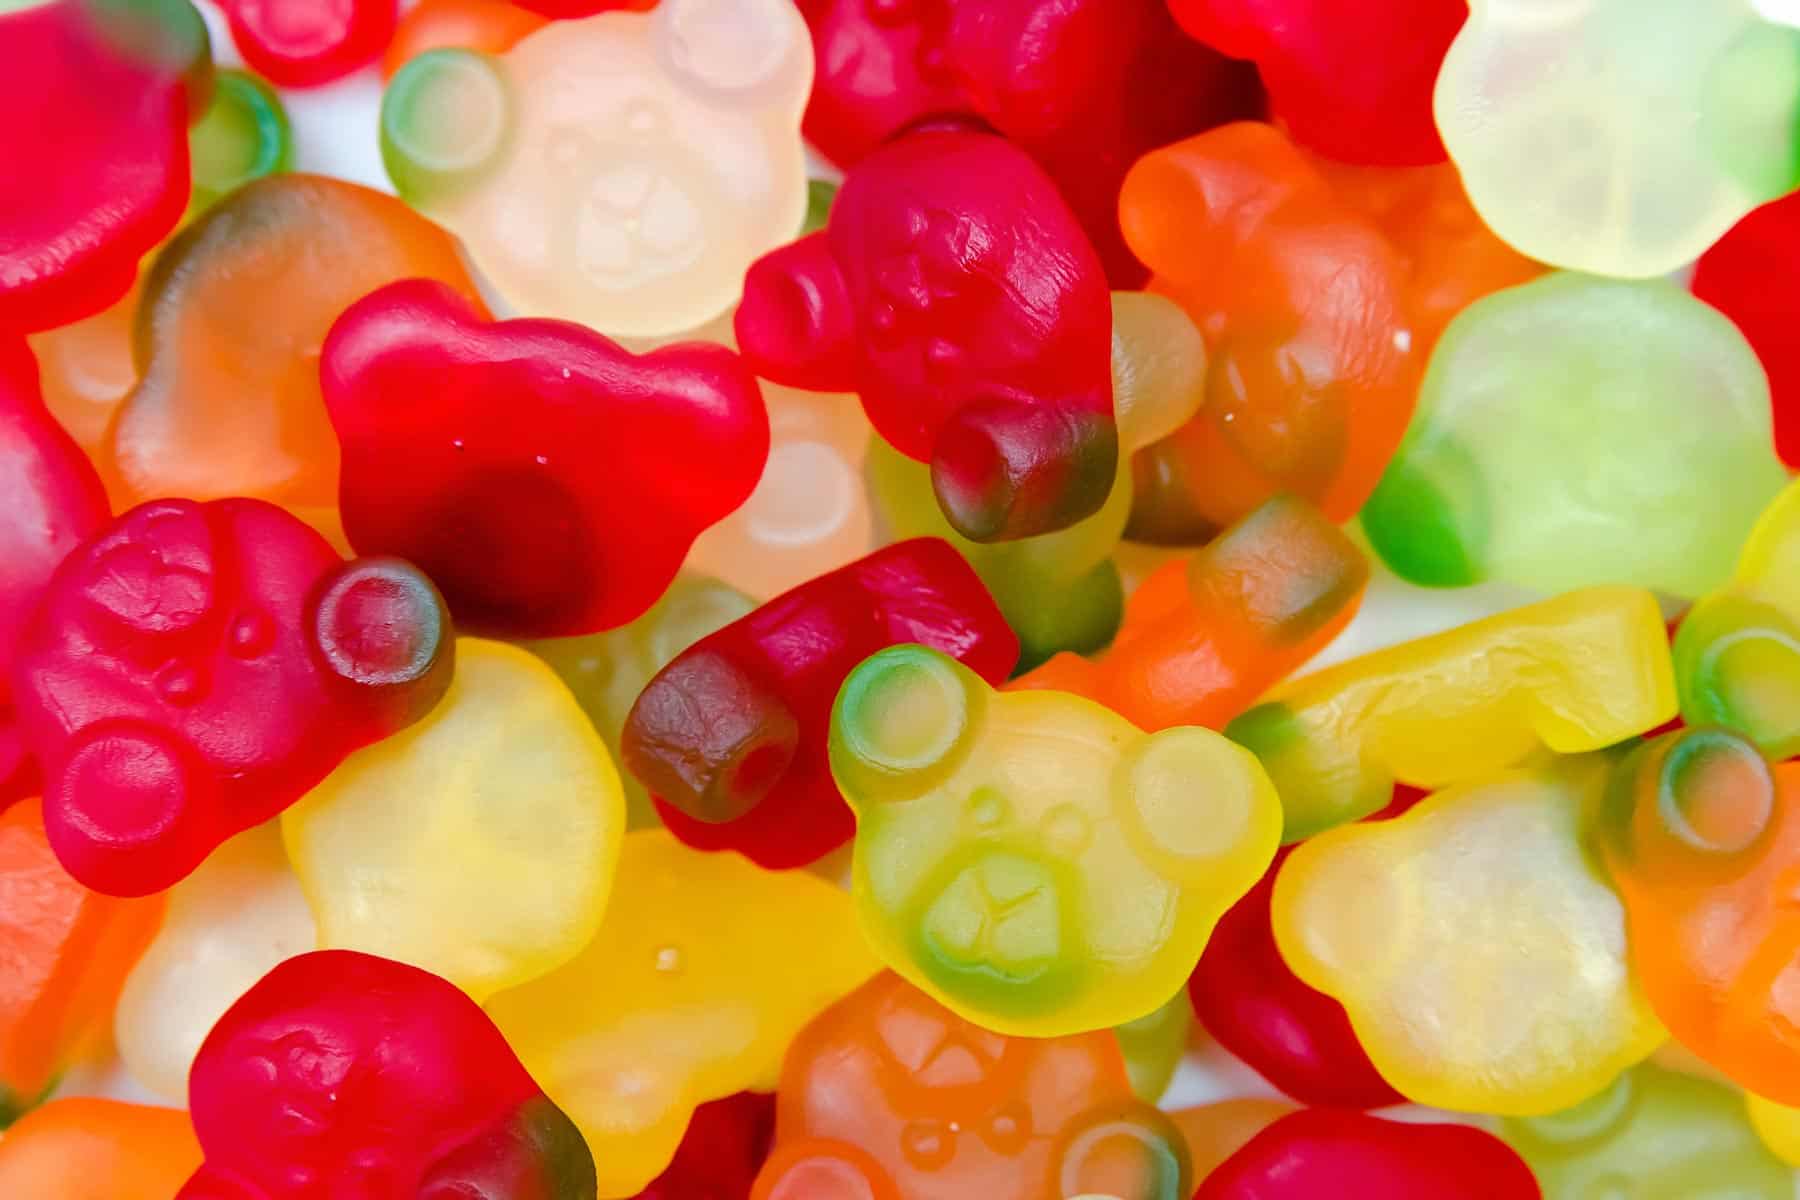 How to Choose the Right Delta 8 Gummies for You